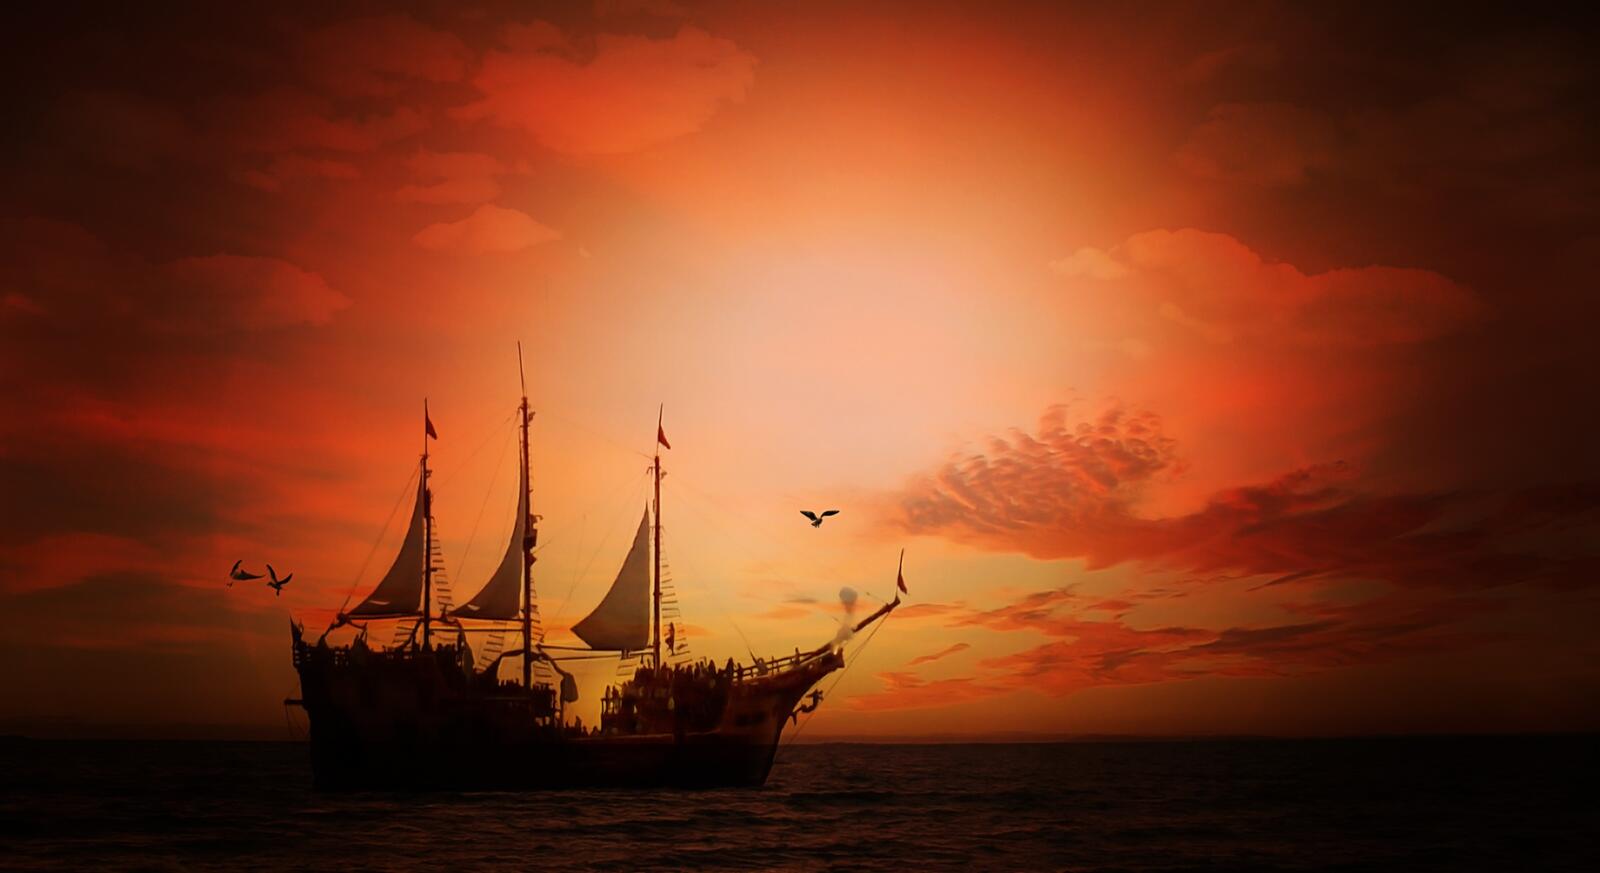 Free photo A picture of a large sailing ship at sunset.